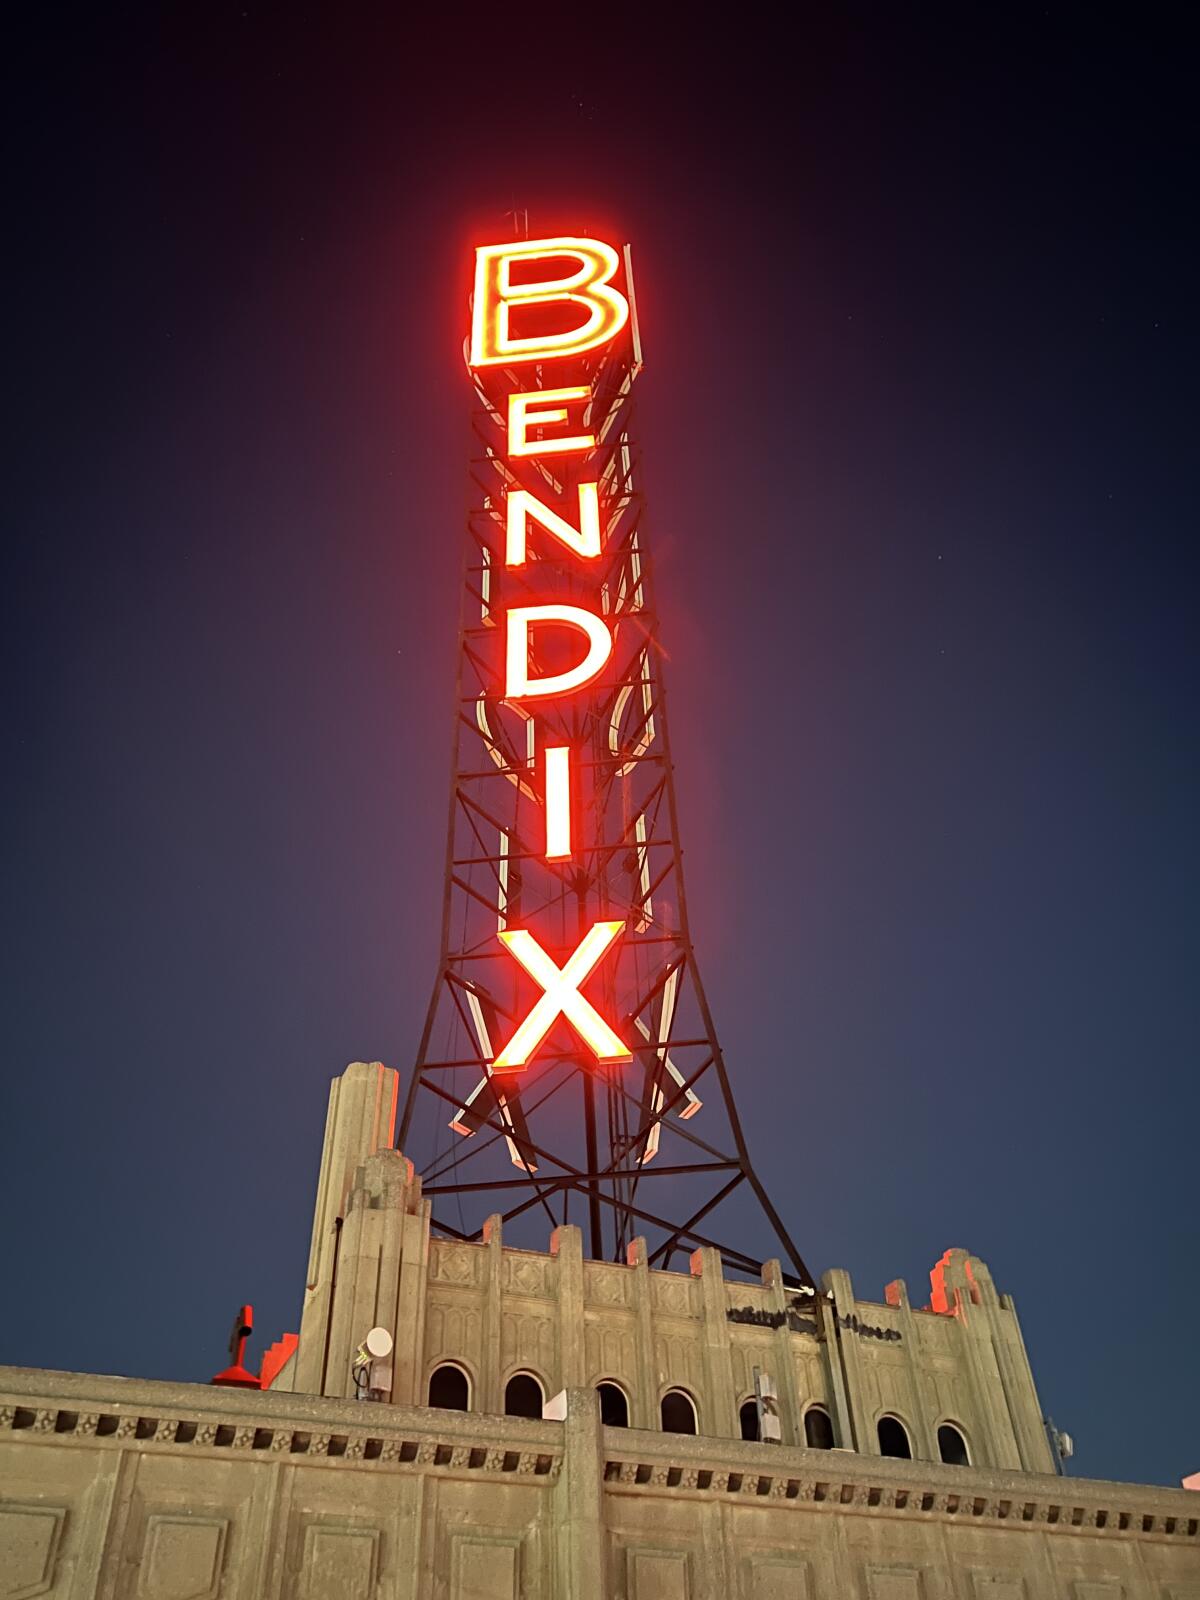 A neon sign at the top of a building